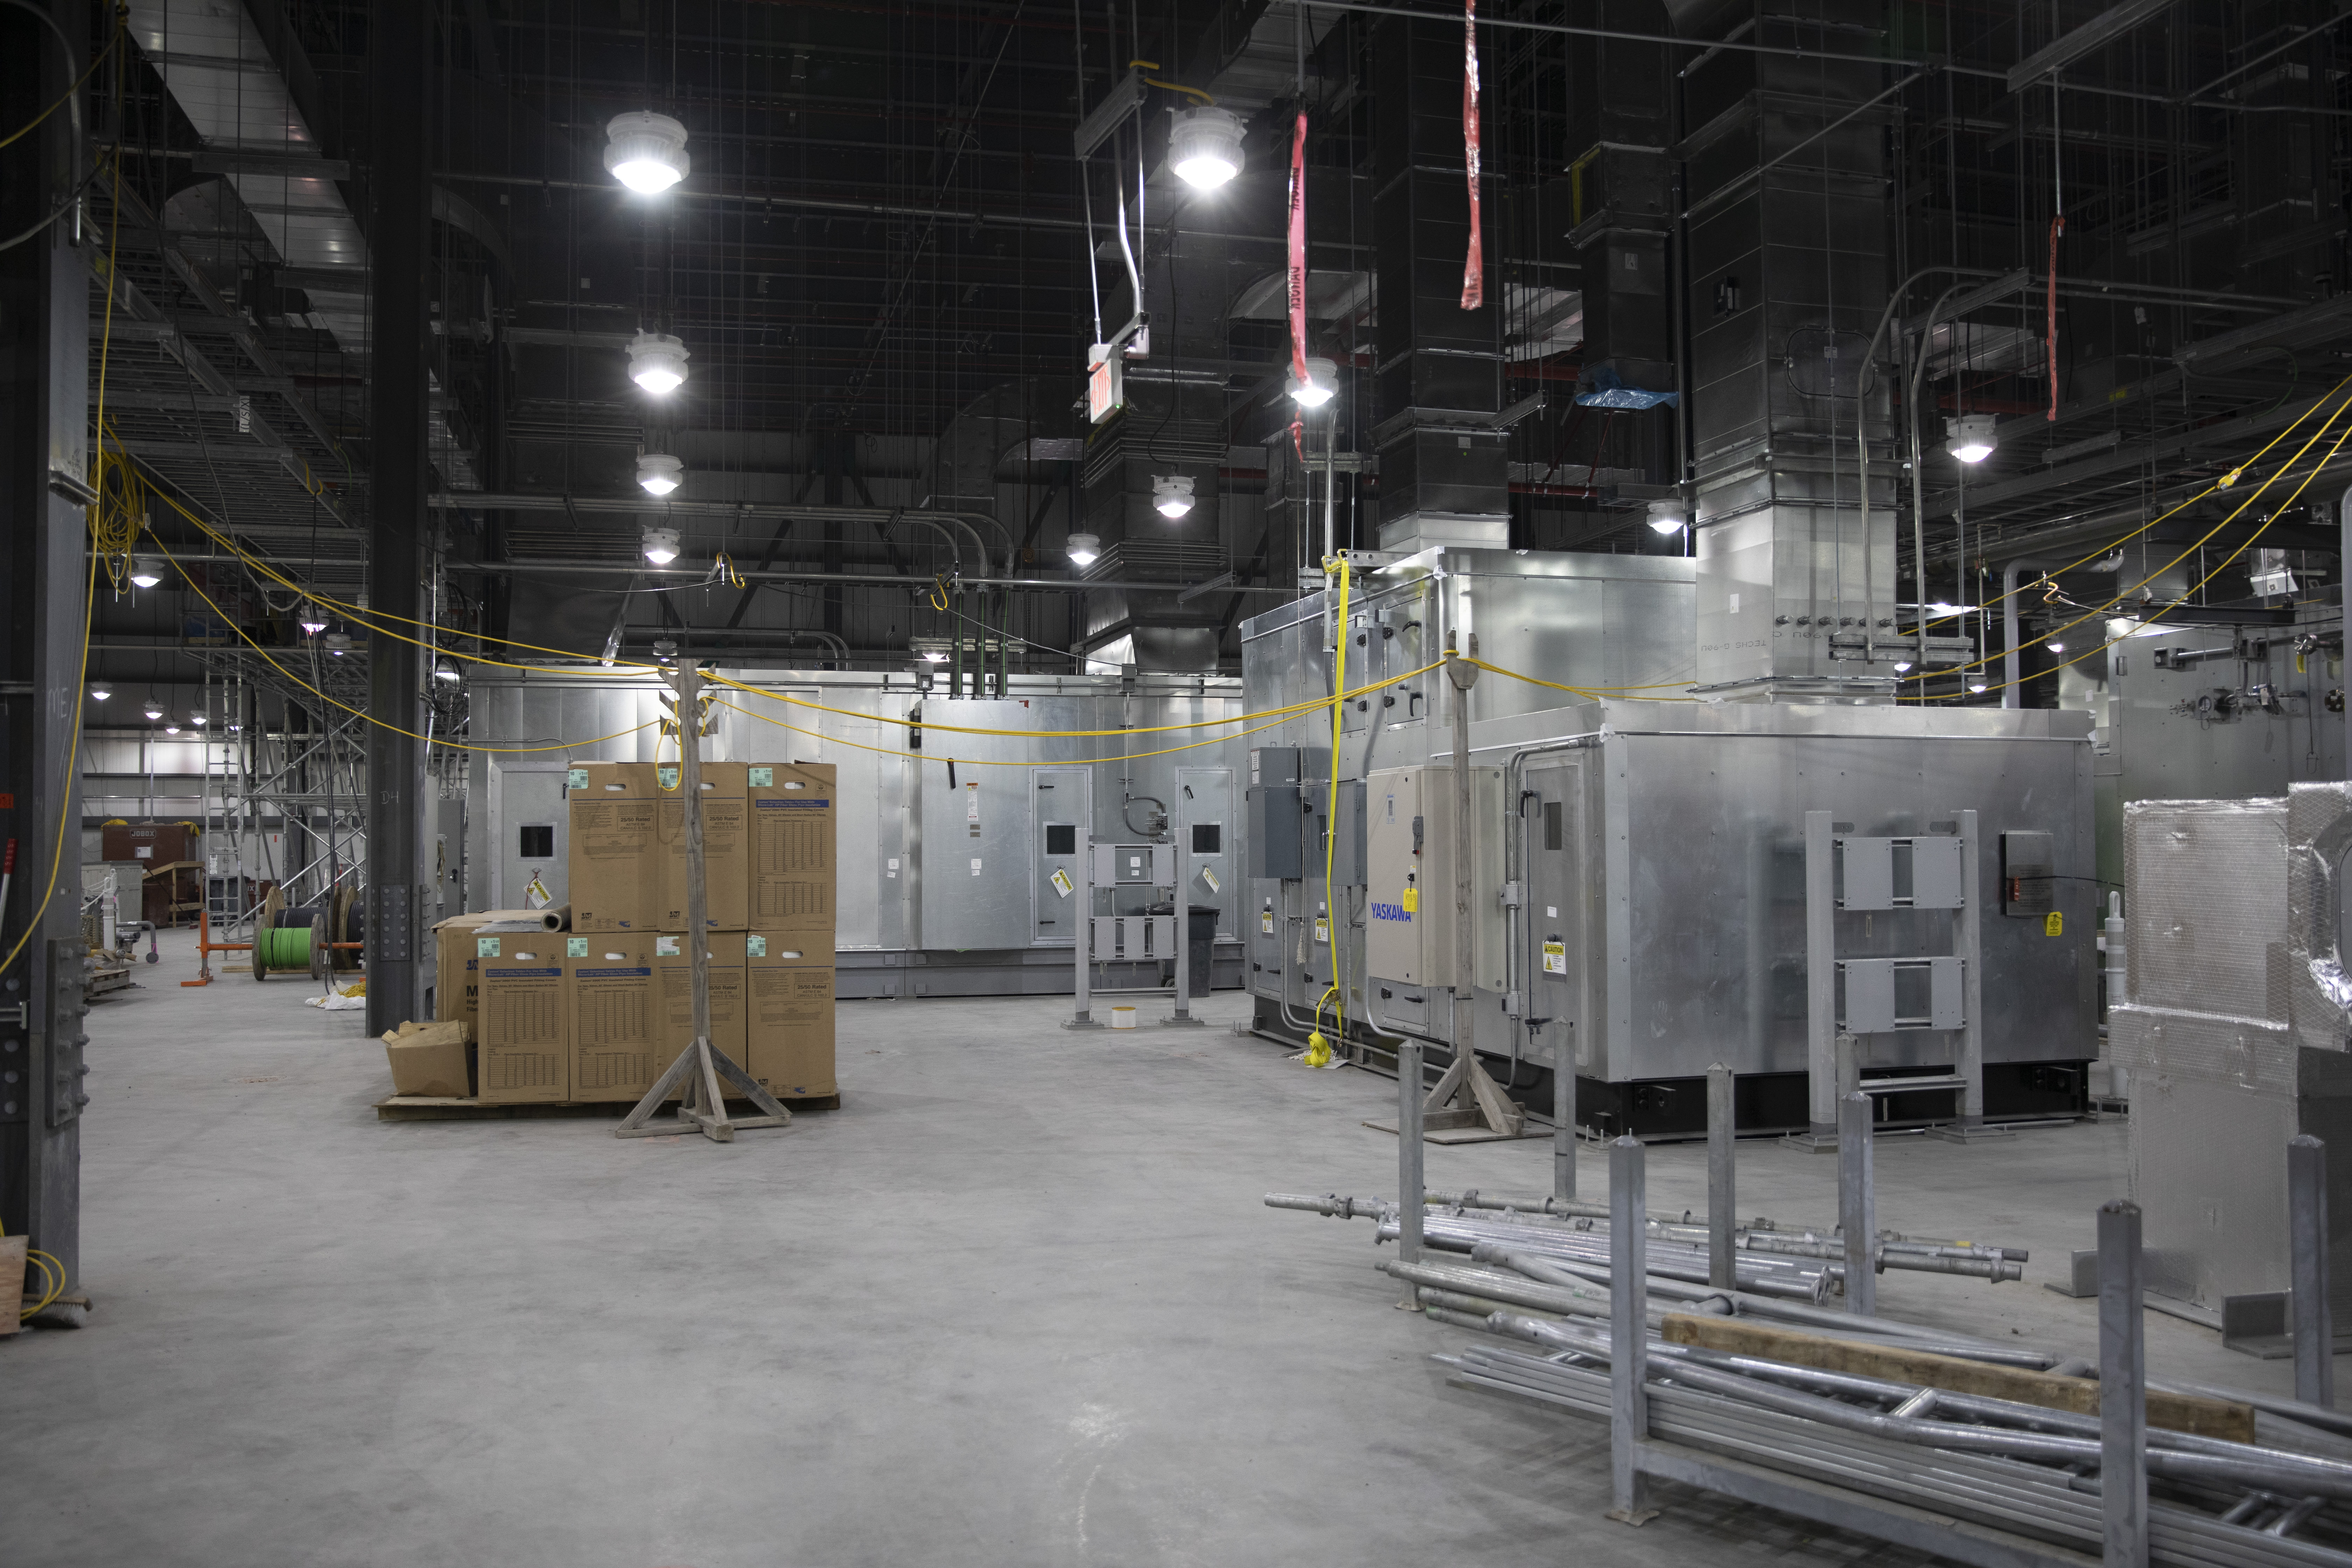 The Mechanical Electrical Building houses all of the Uranium Processing Facility’s air handling units, which will be used to regulate and circulate the air throughout each building.